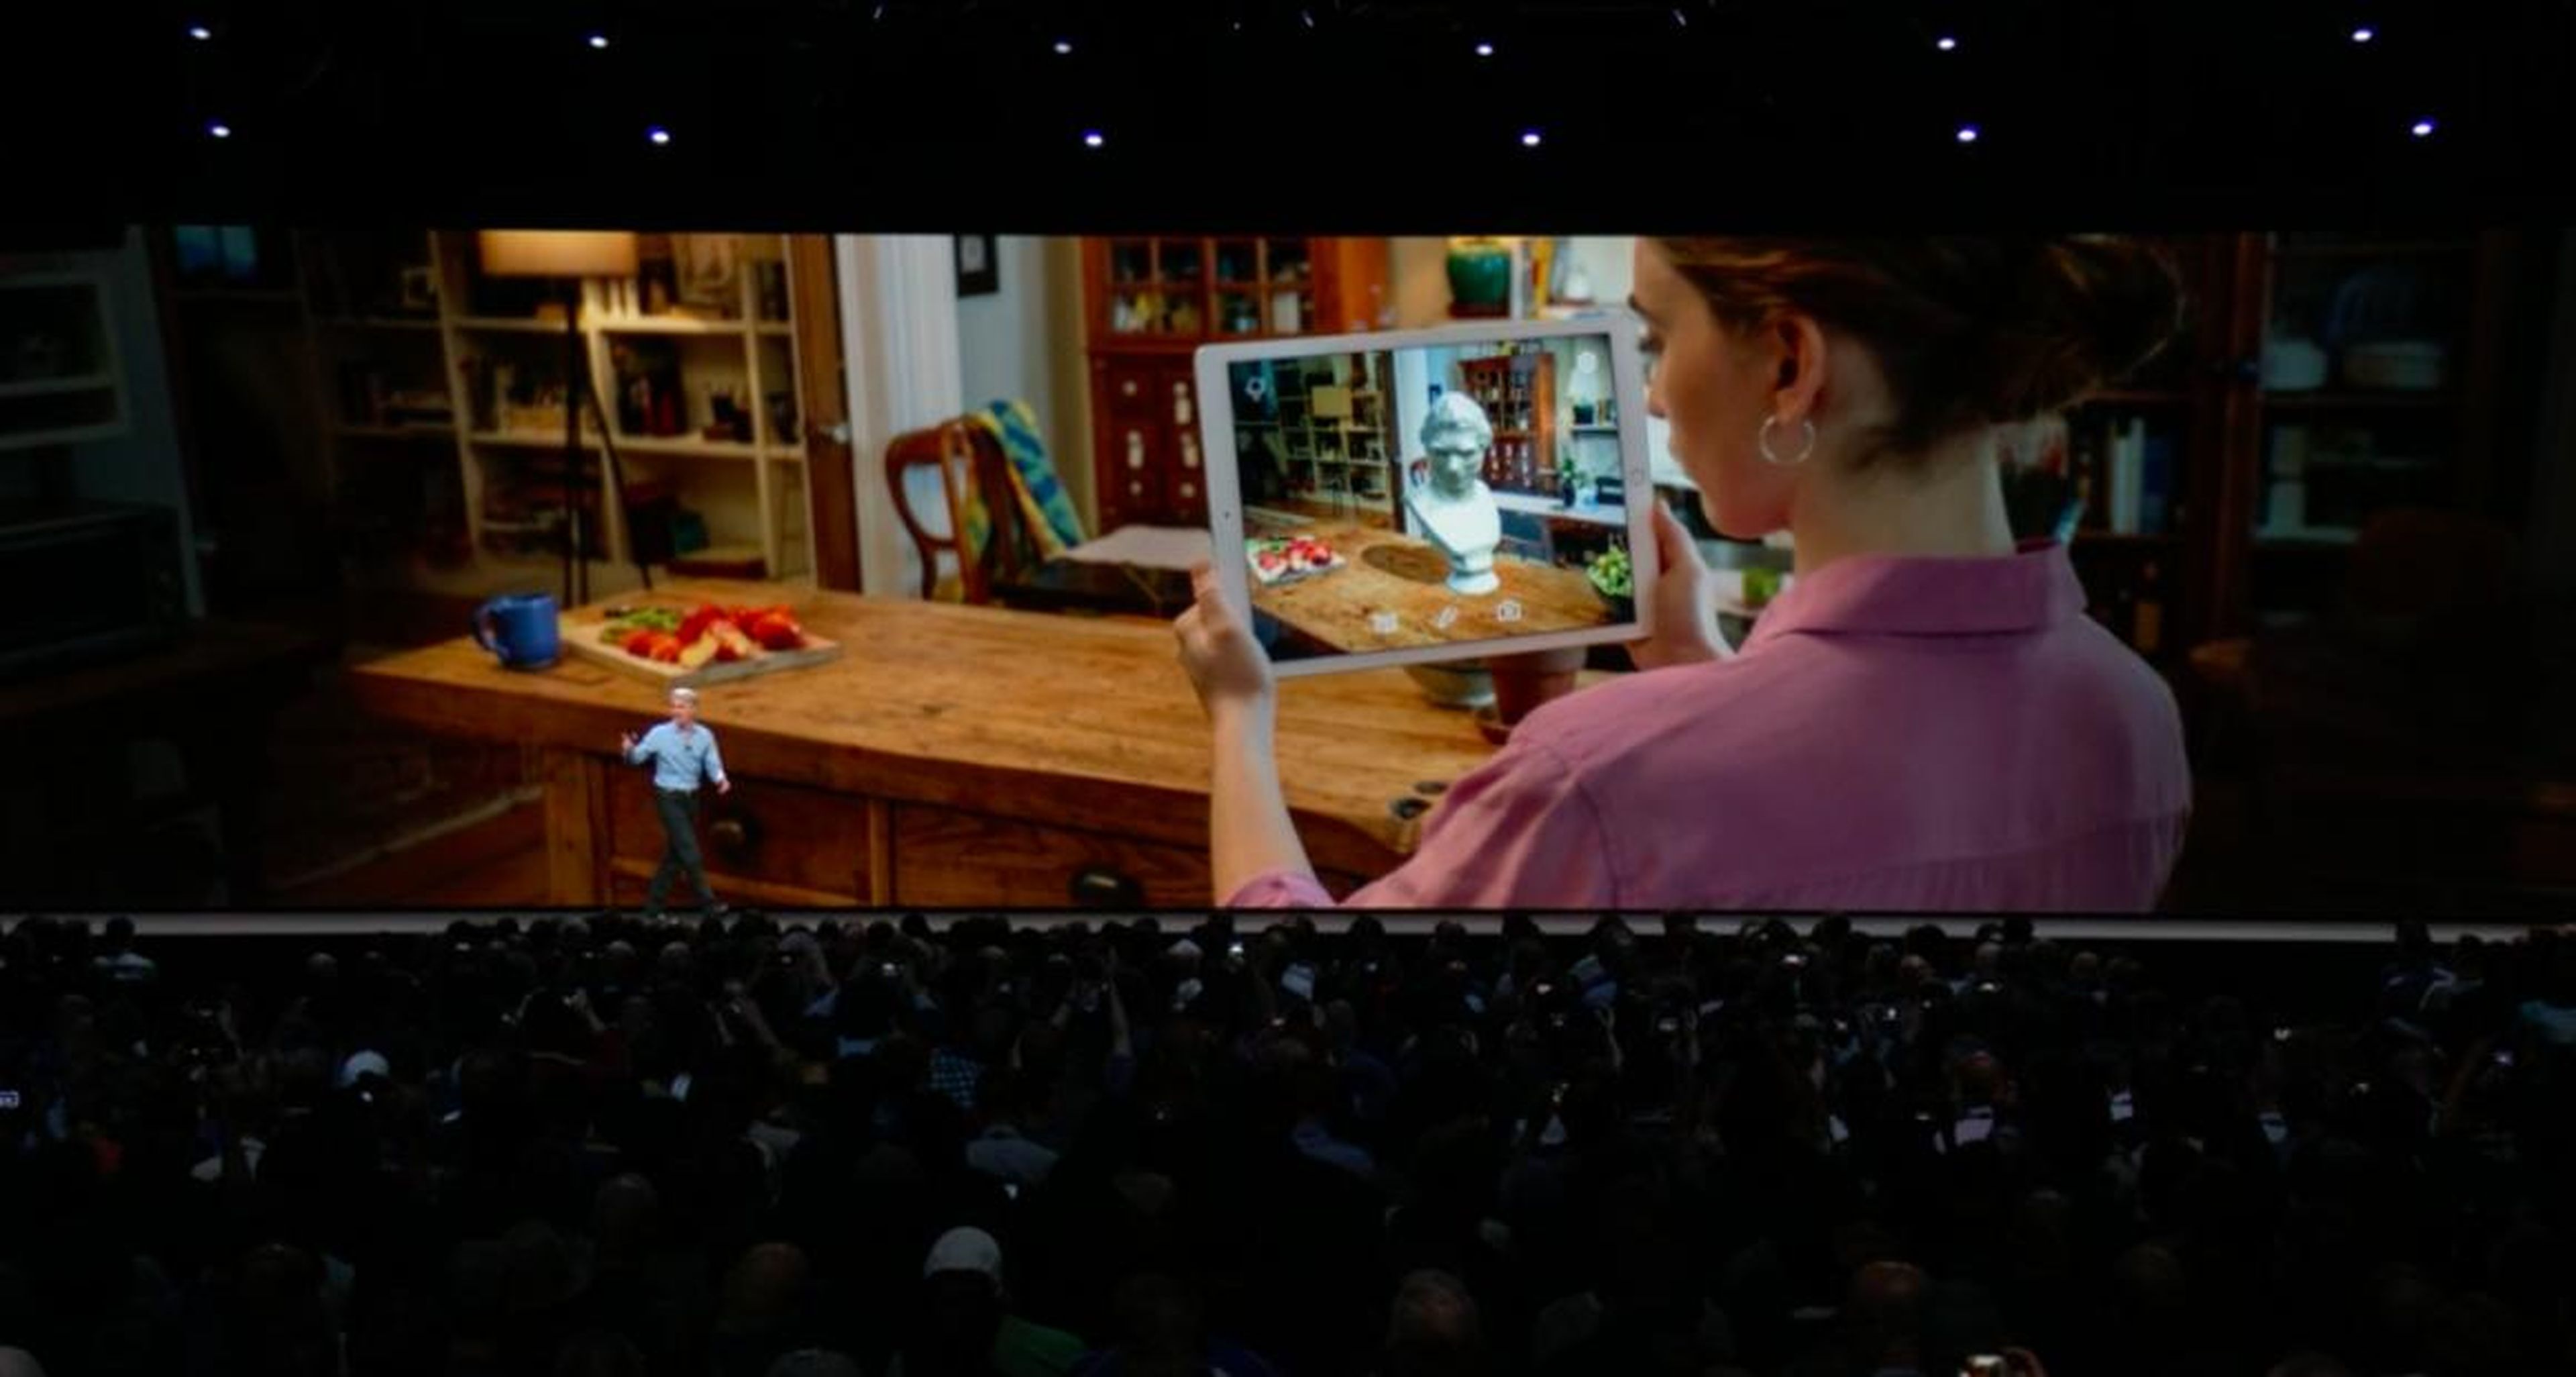 3. iOS 12 features ARKit 2, which offers improved face-tracking, more realistic rendering, and support for 3D object detection and persistence for more immersive augmented-reality experiences. The coolest part: You can play AR